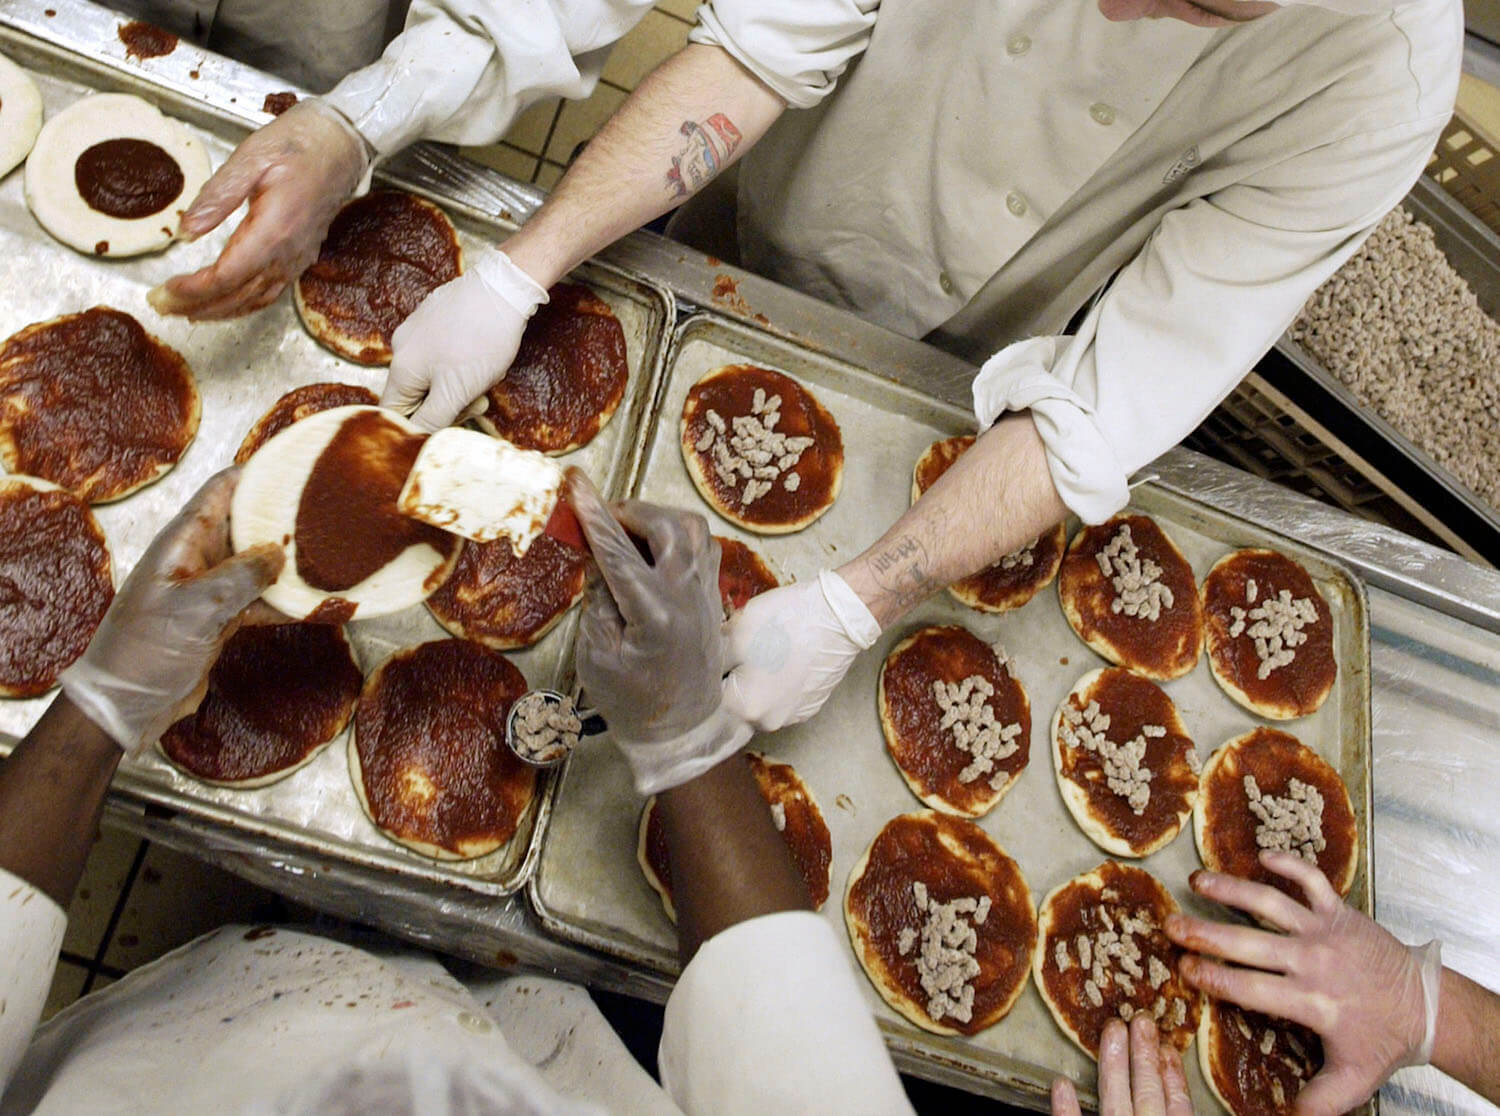 Inmates at the Airway Heights Corrections Center work on a production line to make mini-frozen pizzas at the largest prison-based food factory in the Northwest, November 10, 2005 in Airway Heights, Washington.